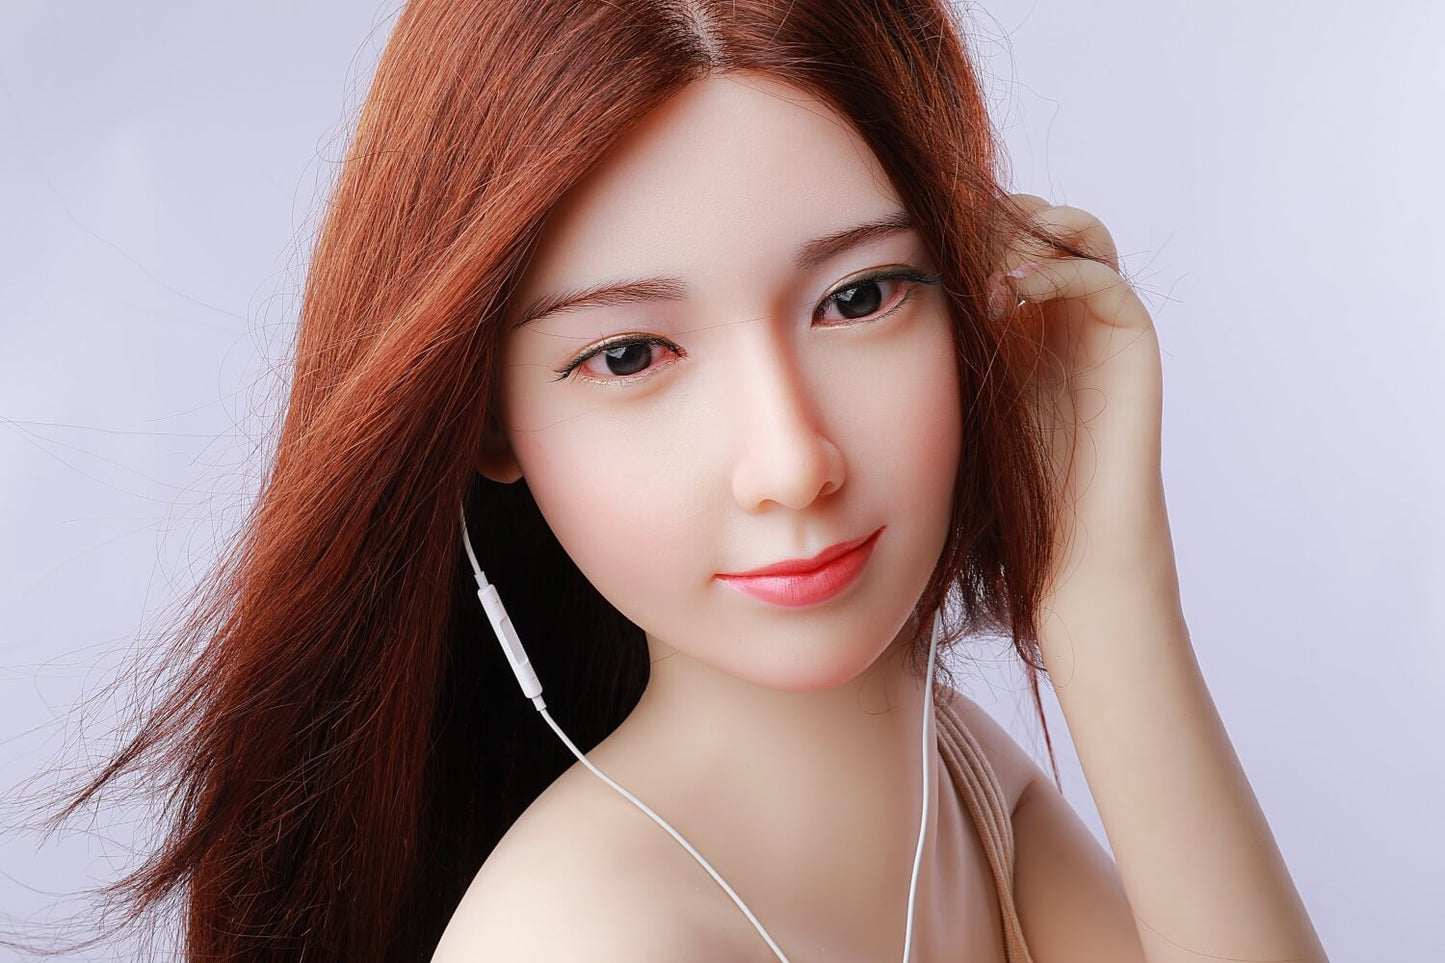 Yun sex doll - small chest and pink face